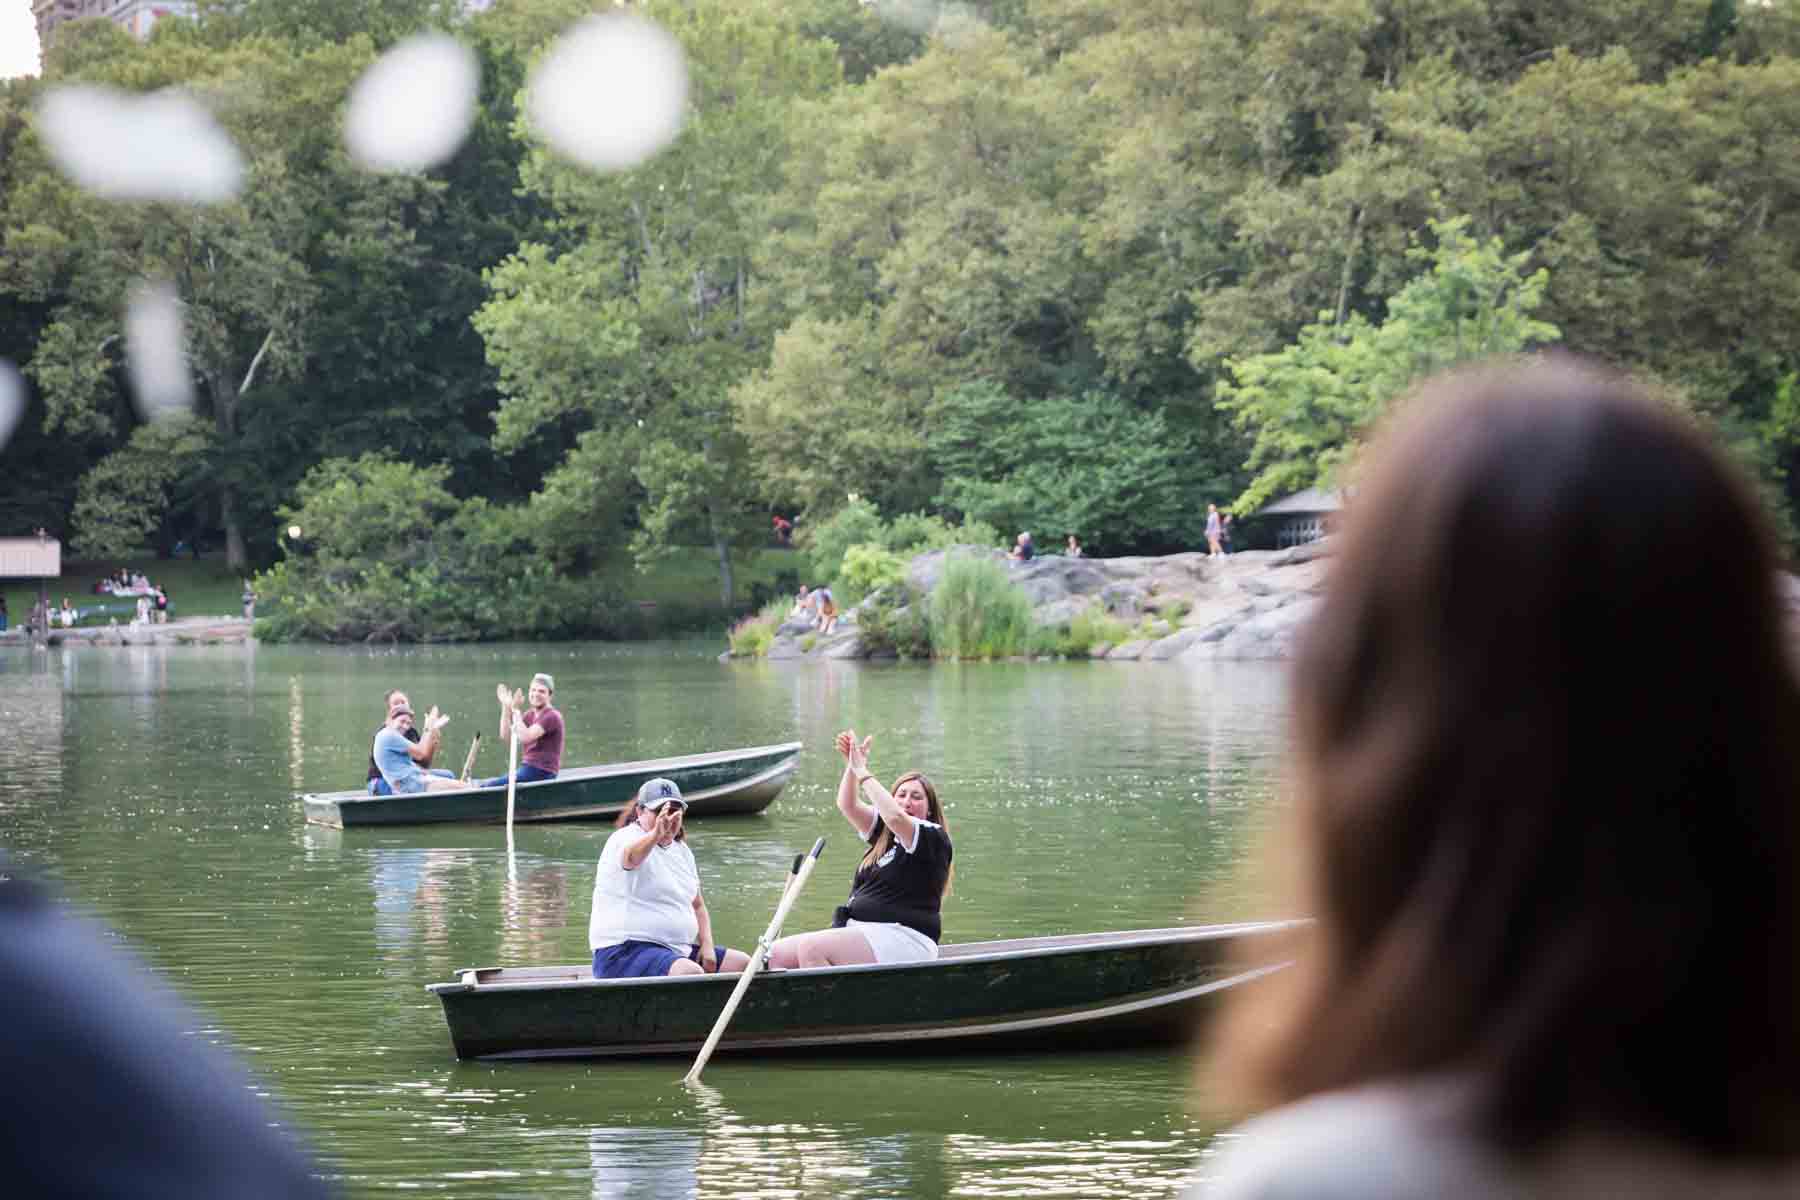 Boaters in Central Park lake clapping for an article entitled, ‘Do you need a permit to get married in Central Park?’